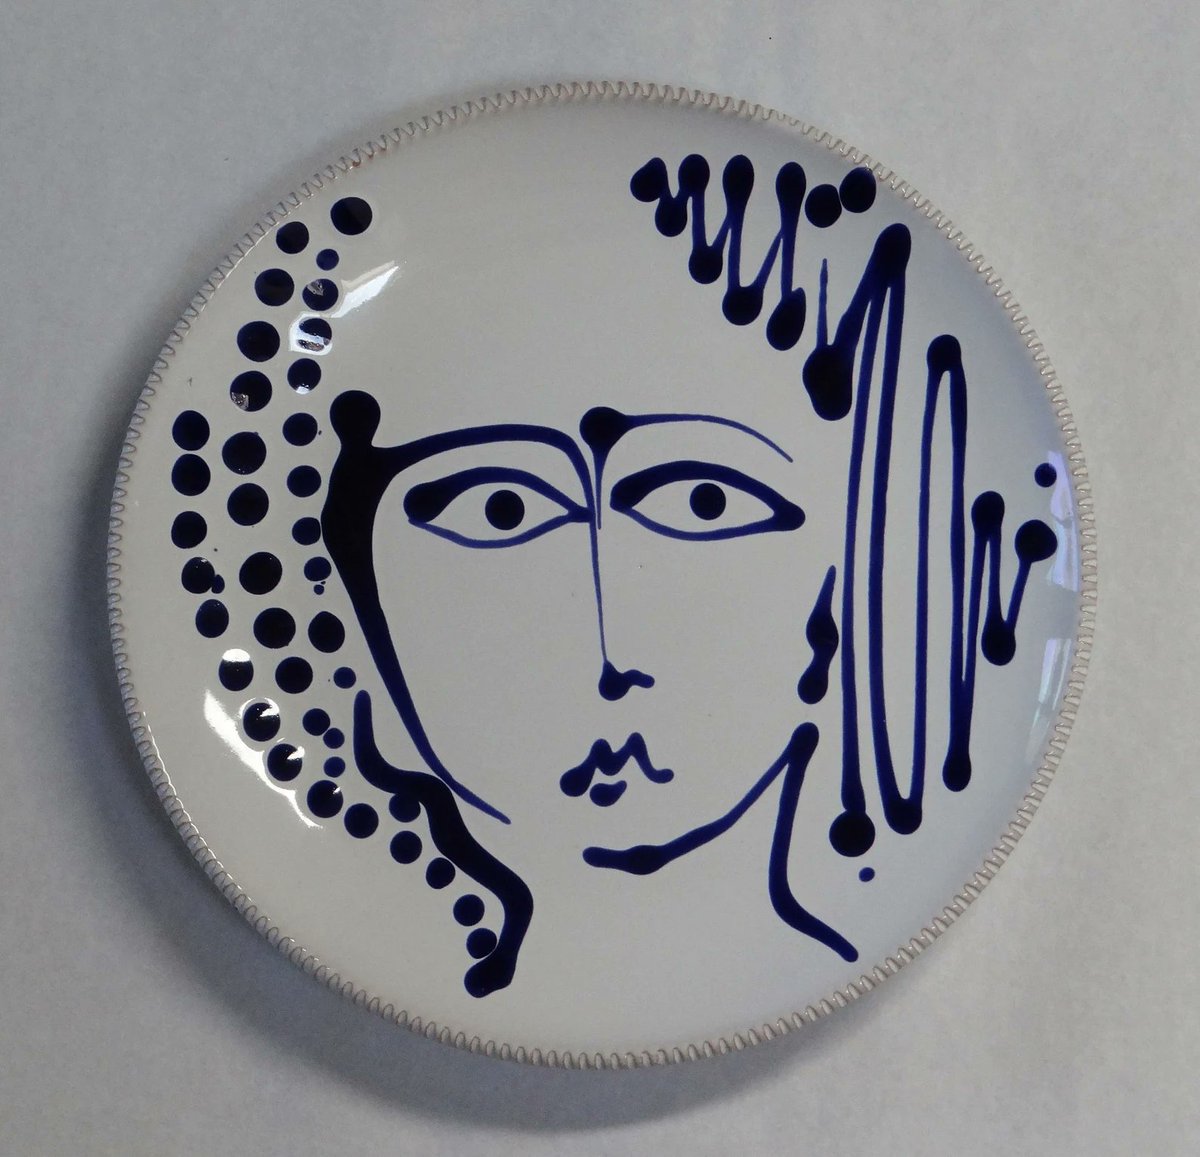 Plate decorated with a woman's face, Italian ceramics, handcrafted pottery from Puglia, vintage crafts from Italy, vintage collectible plate #homedecor #vintage #decor #HomeStyle #plates #DecorateWithArt #elevateYourDecor #wiseshopper 
Available here
 elementsdeco.etsy.com/listing/145960…